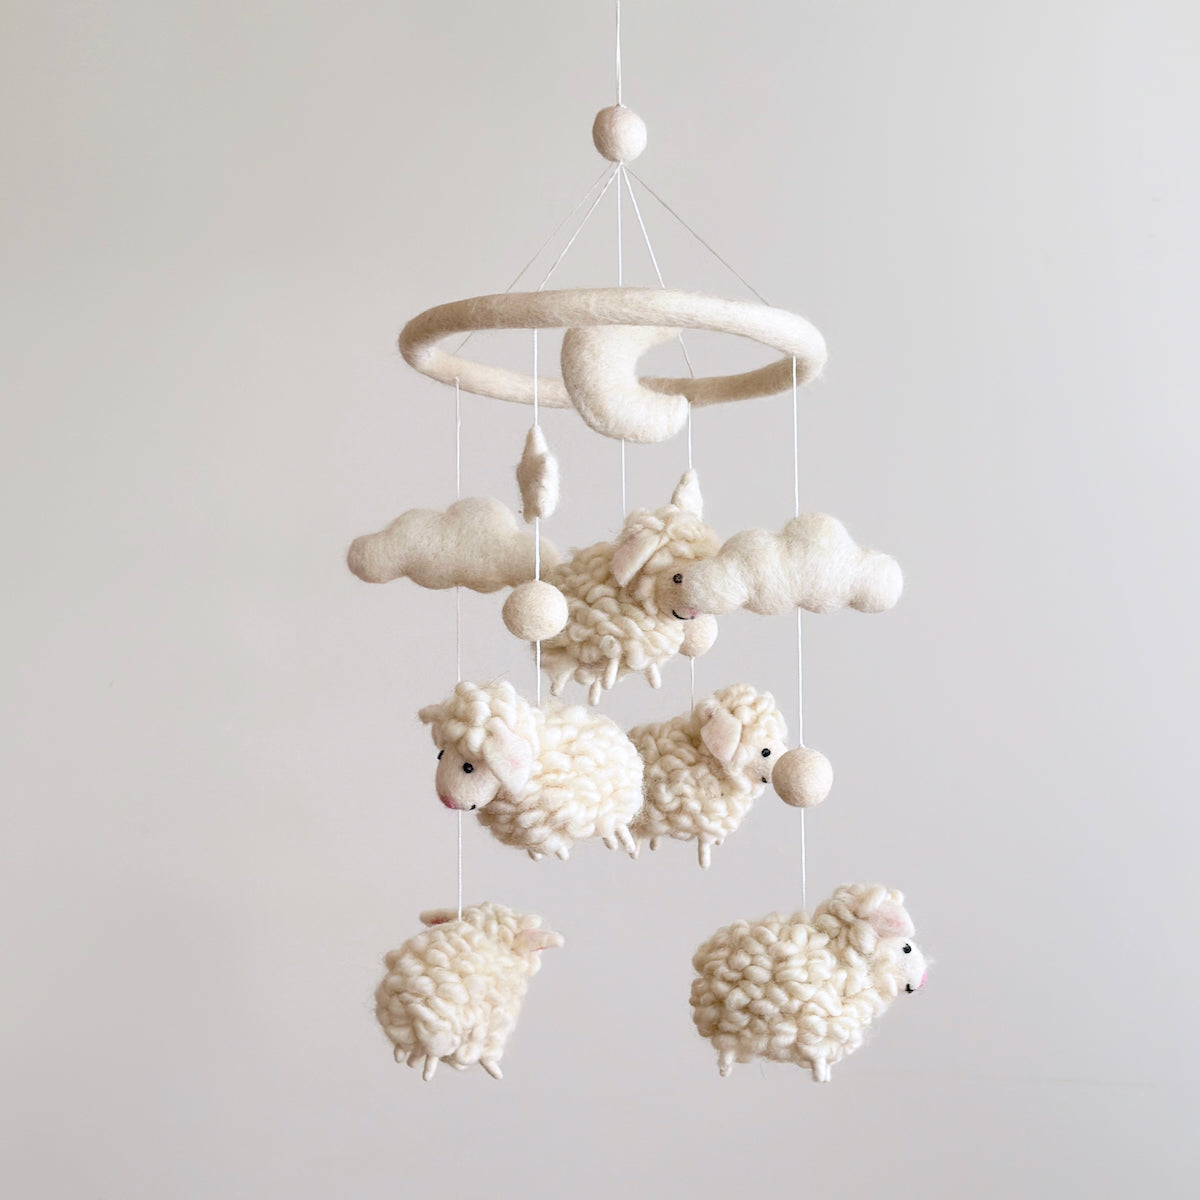 Felt Counting Sheep Baby Mobile